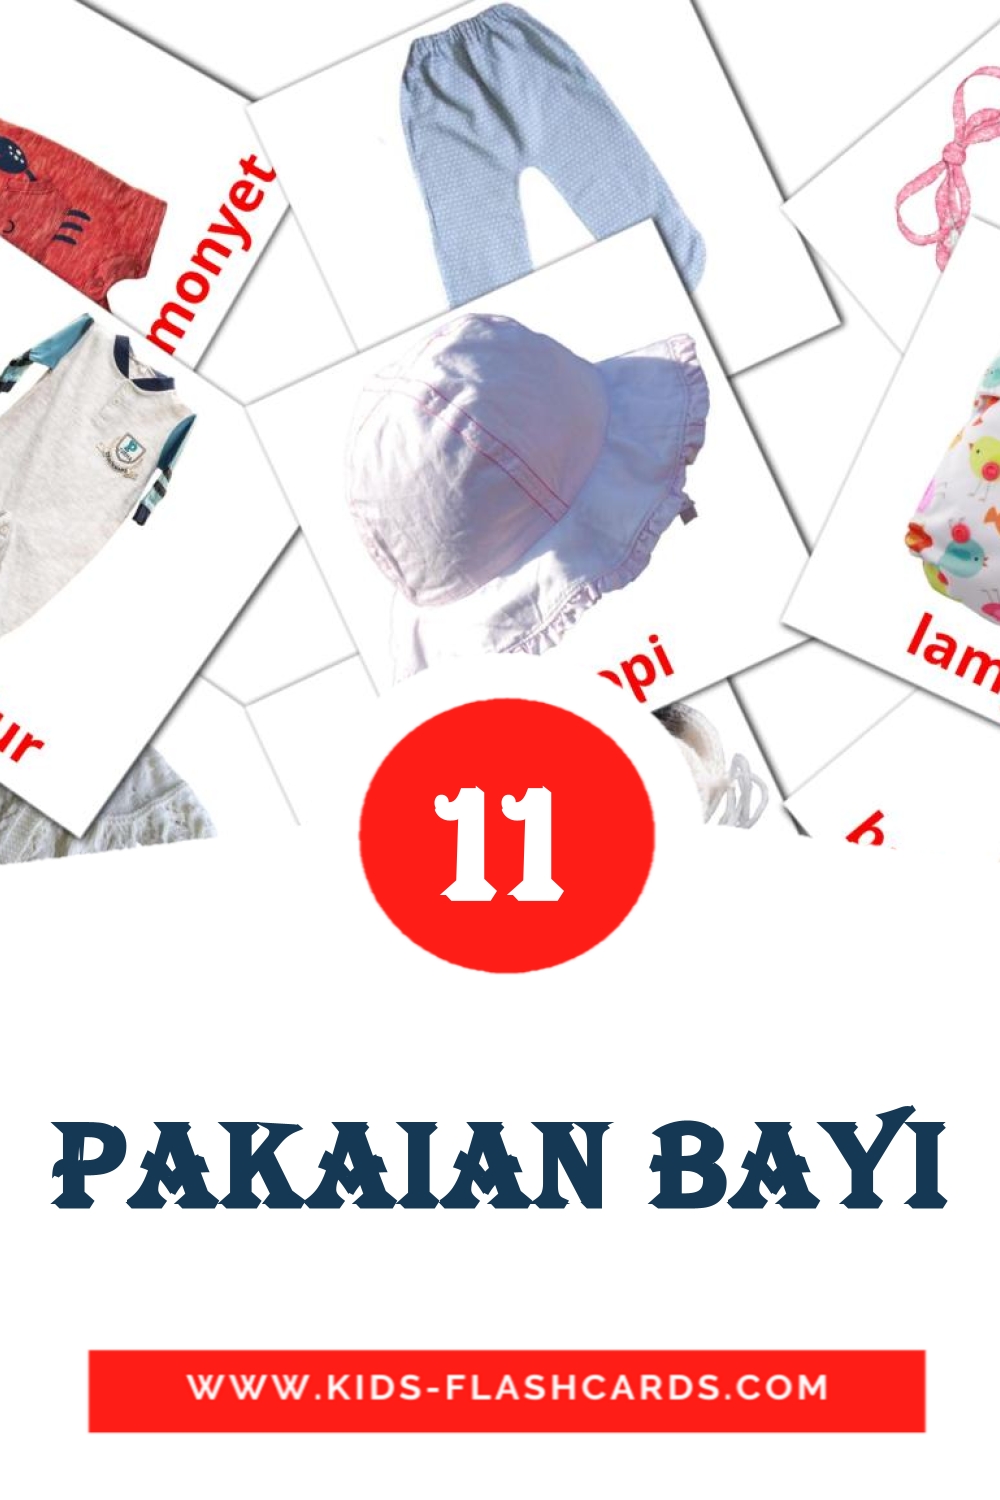 11 Pakaian Bayi Picture Cards for Kindergarden in malay